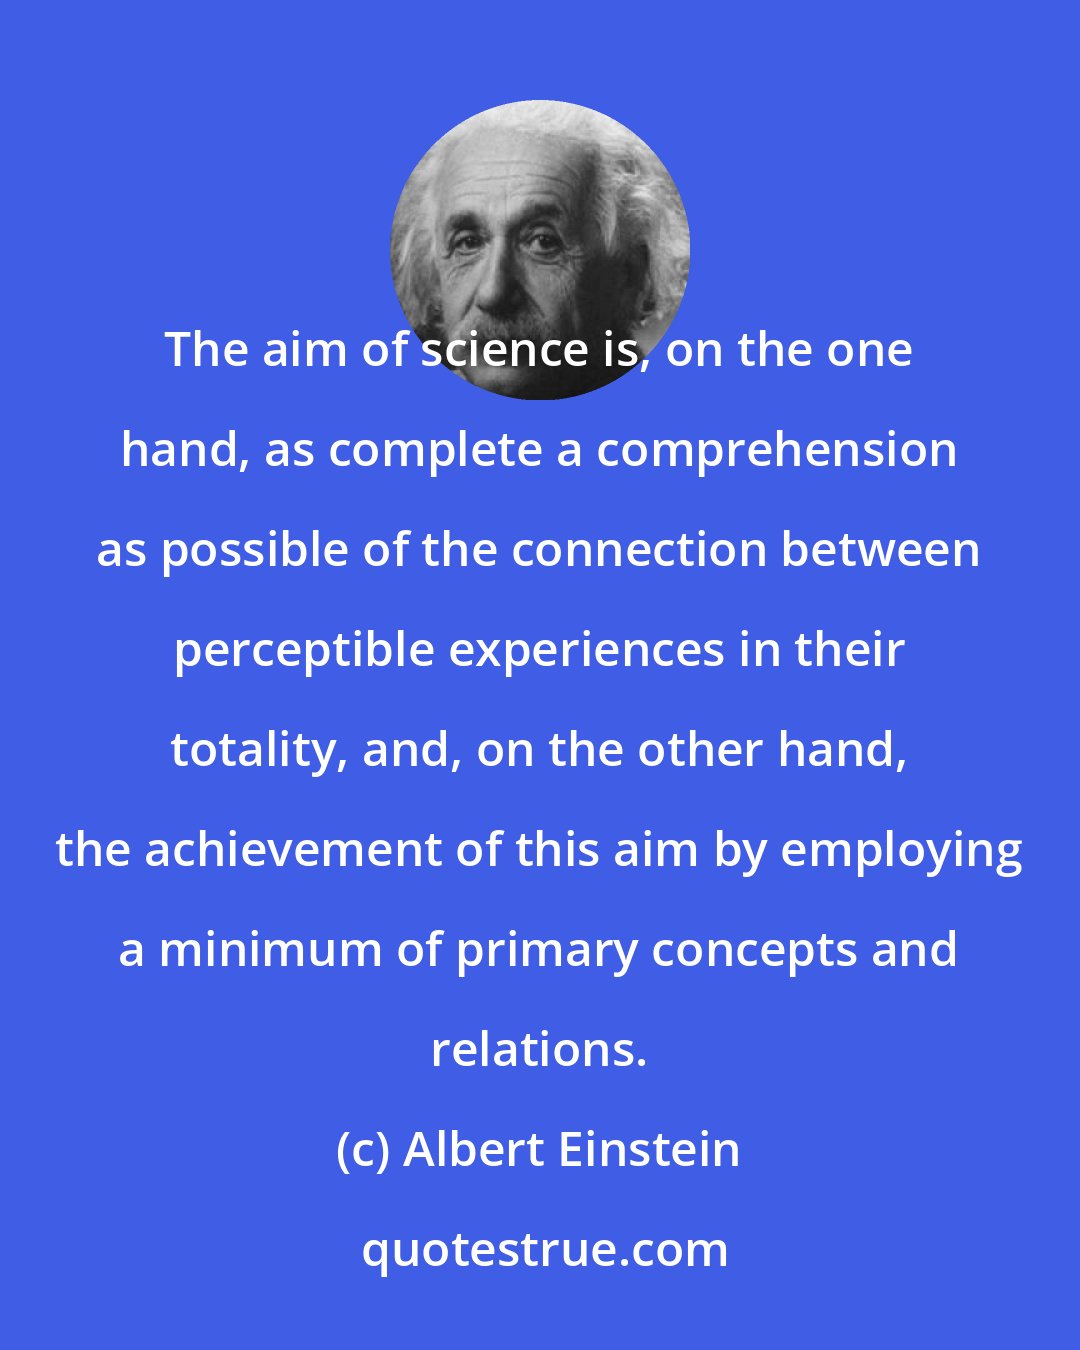 Albert Einstein: The aim of science is, on the one hand, as complete a comprehension as possible of the connection between perceptible experiences in their totality, and, on the other hand, the achievement of this aim by employing a minimum of primary concepts and relations.